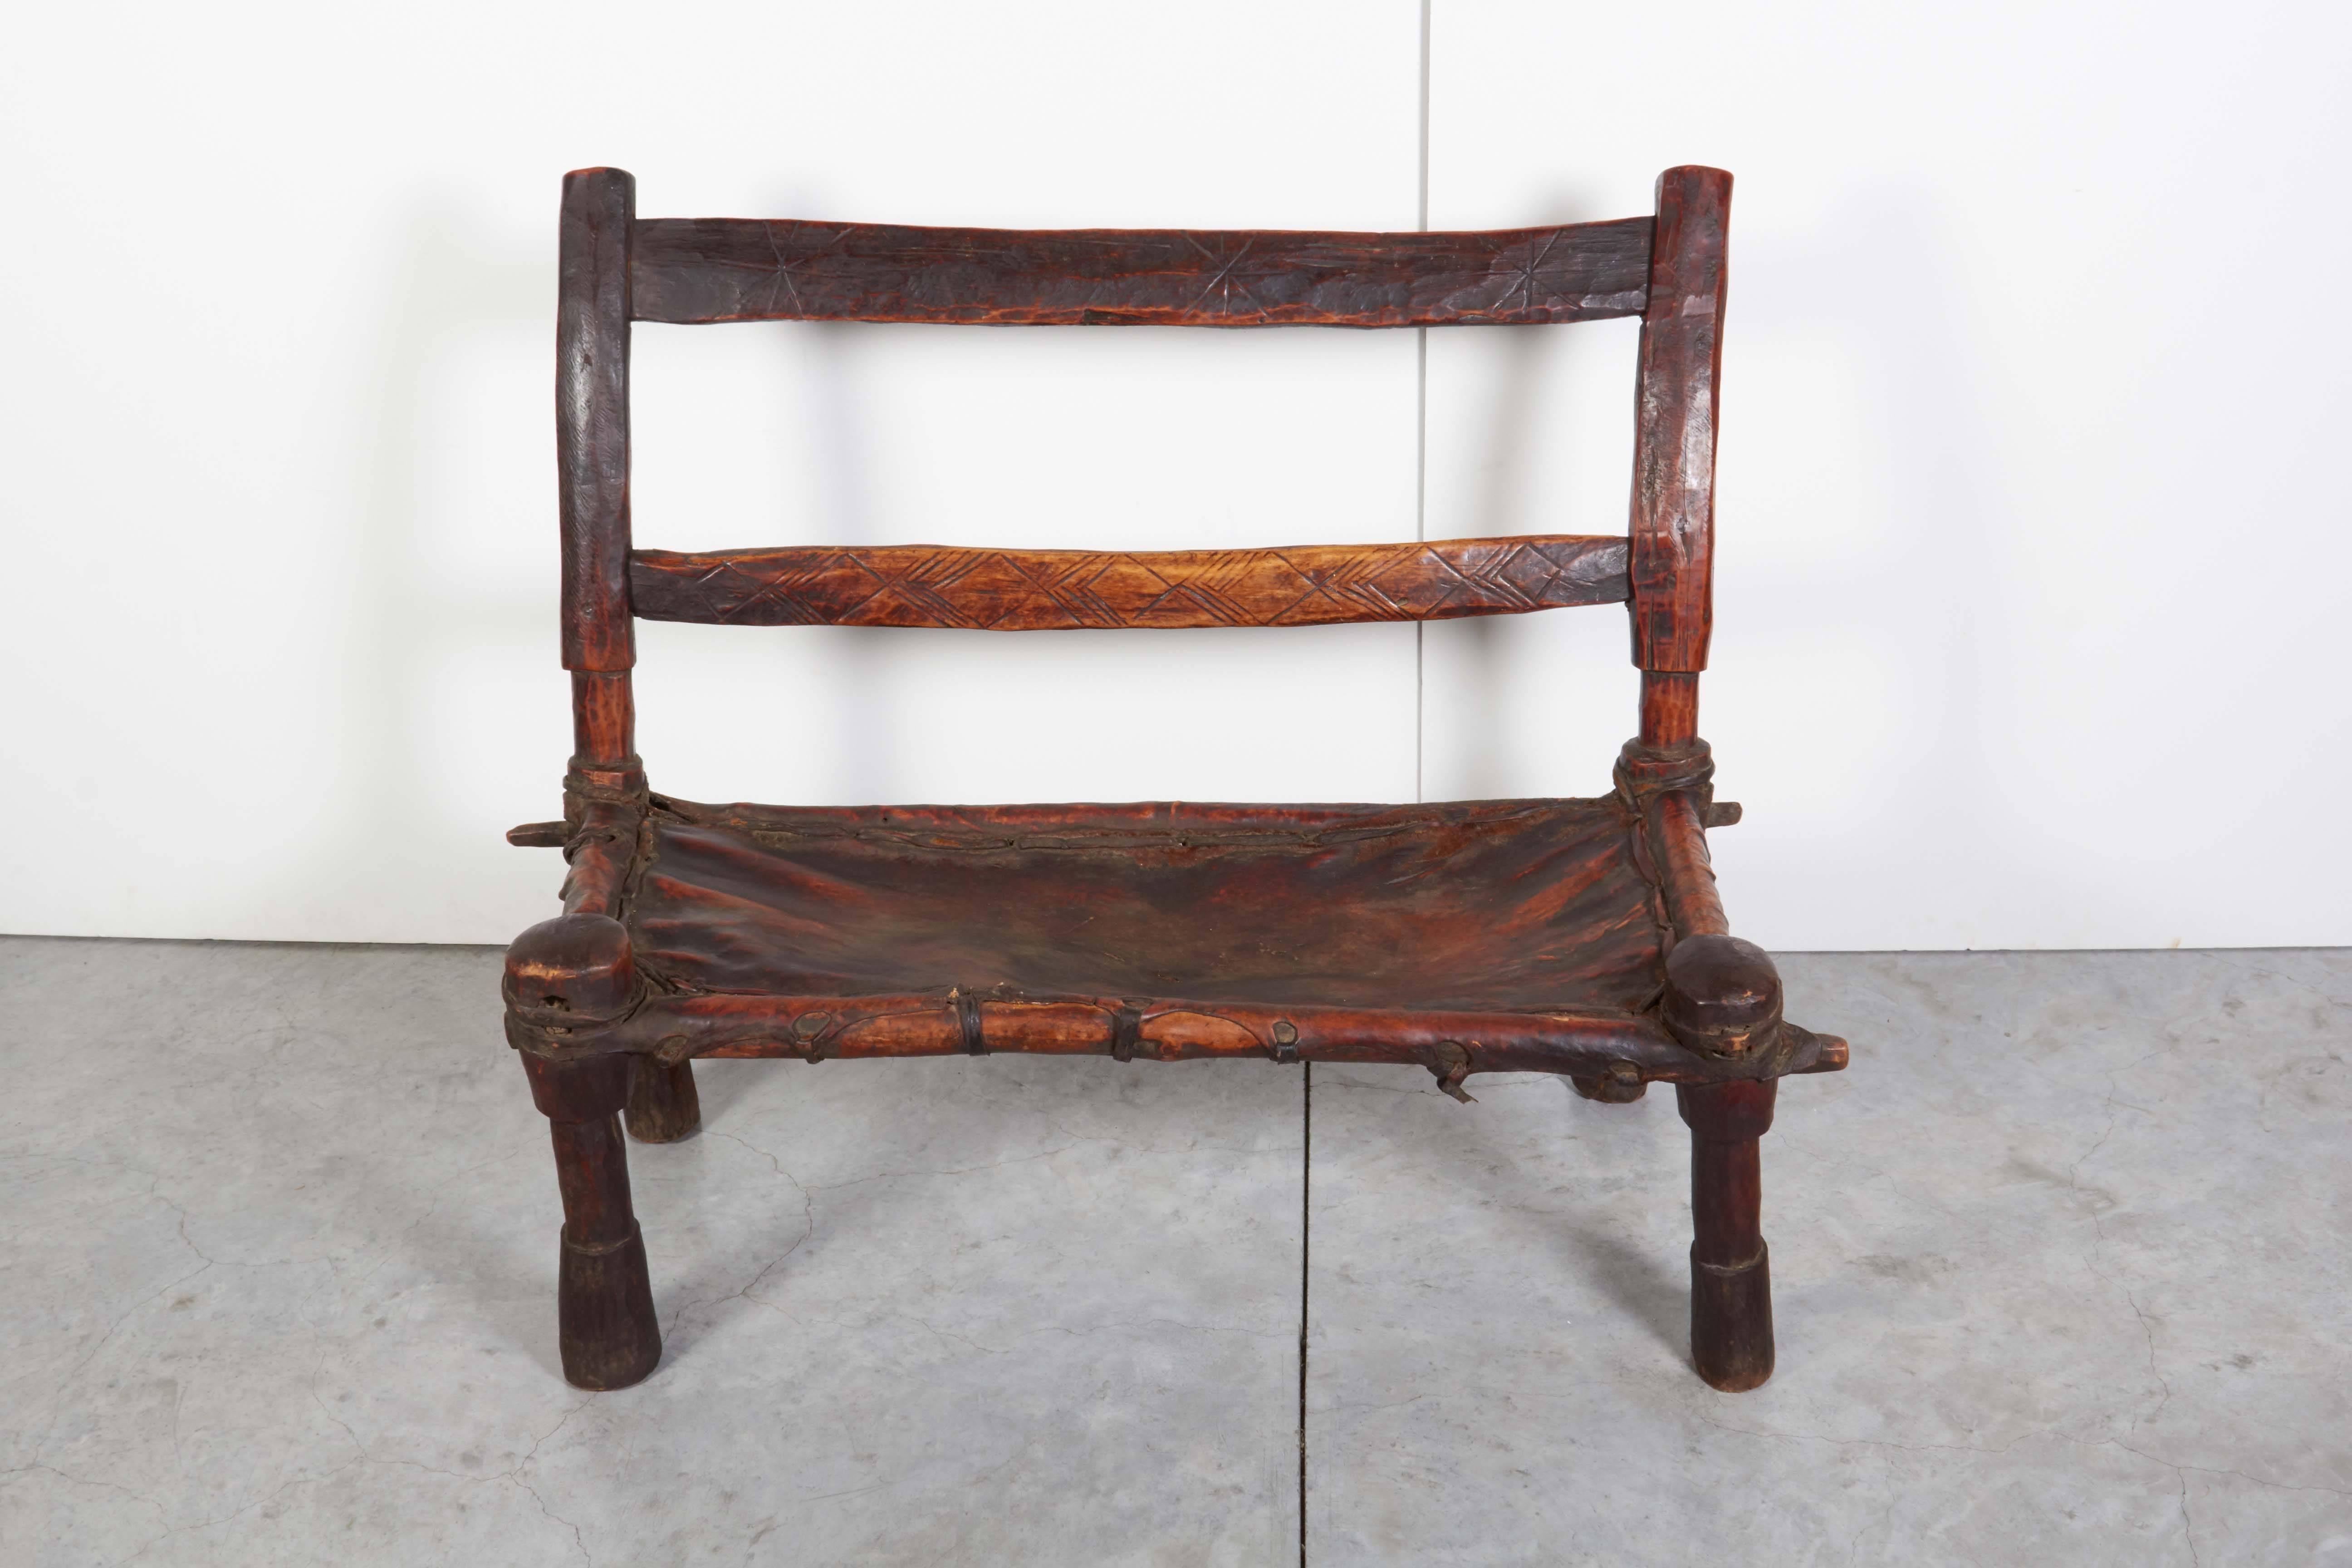 A simple, rustic wooden bench with a beautifully worn leather seat and clean design. This double chair/bench from Ethiopia looks great from any angle and has great presence. 
CH371.